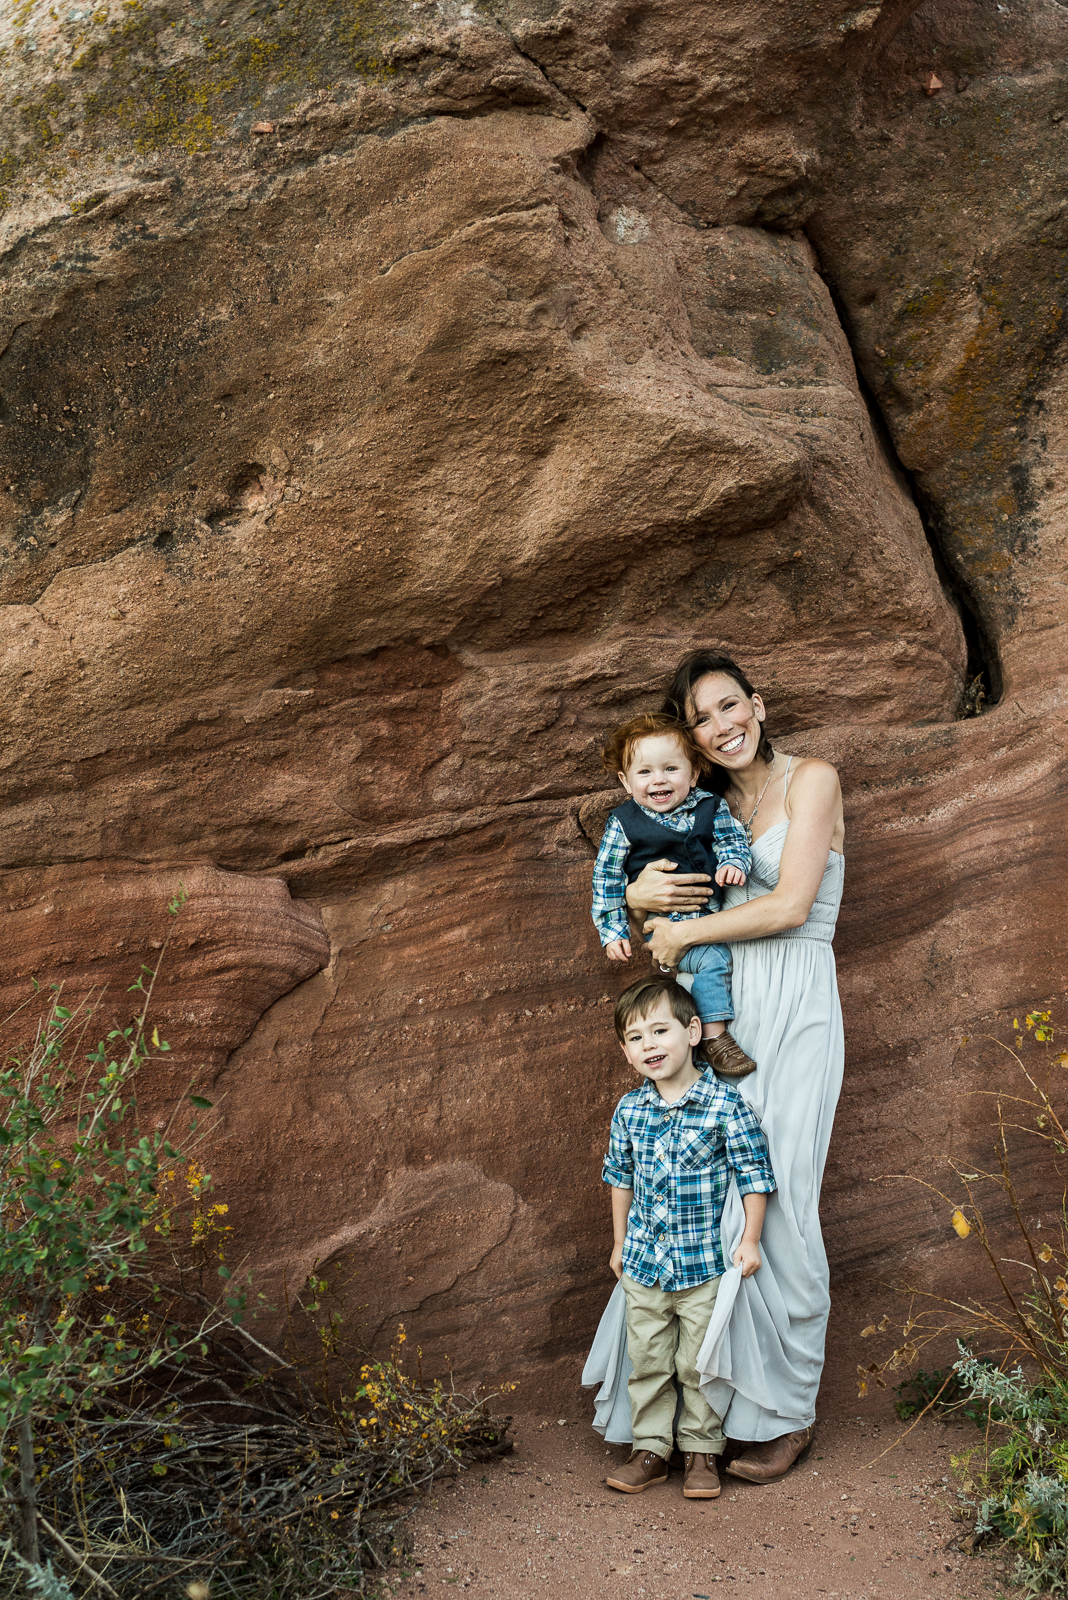 Nicole & Carm | Family Photo | Red Rocks | From the Hip Photo